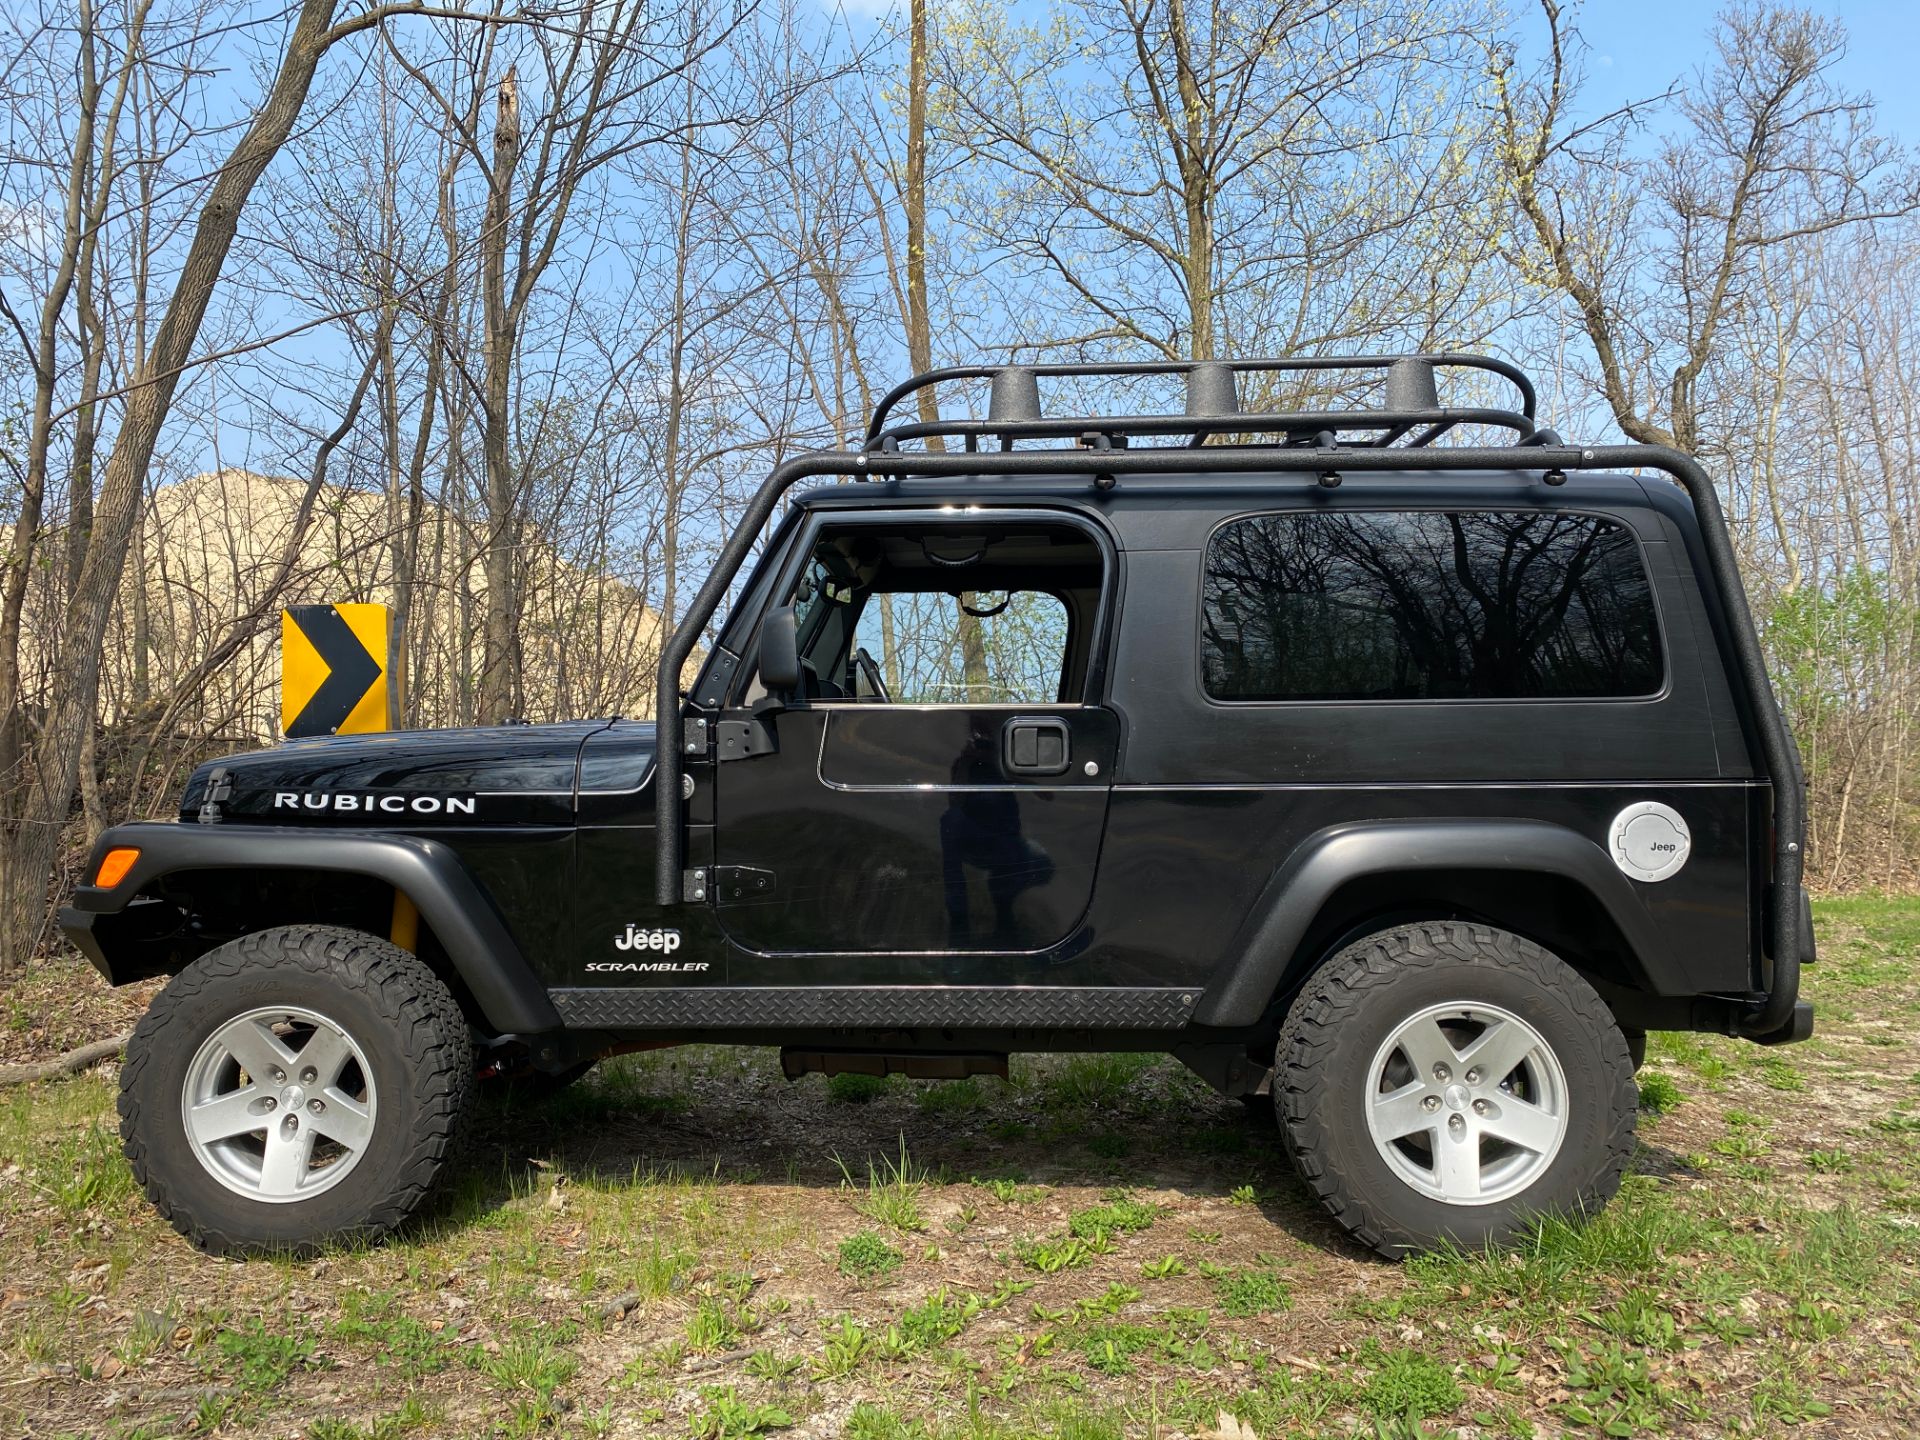 2006 Jeep® Wrangler Unlimited Rubicon in Big Bend, Wisconsin - Photo 19